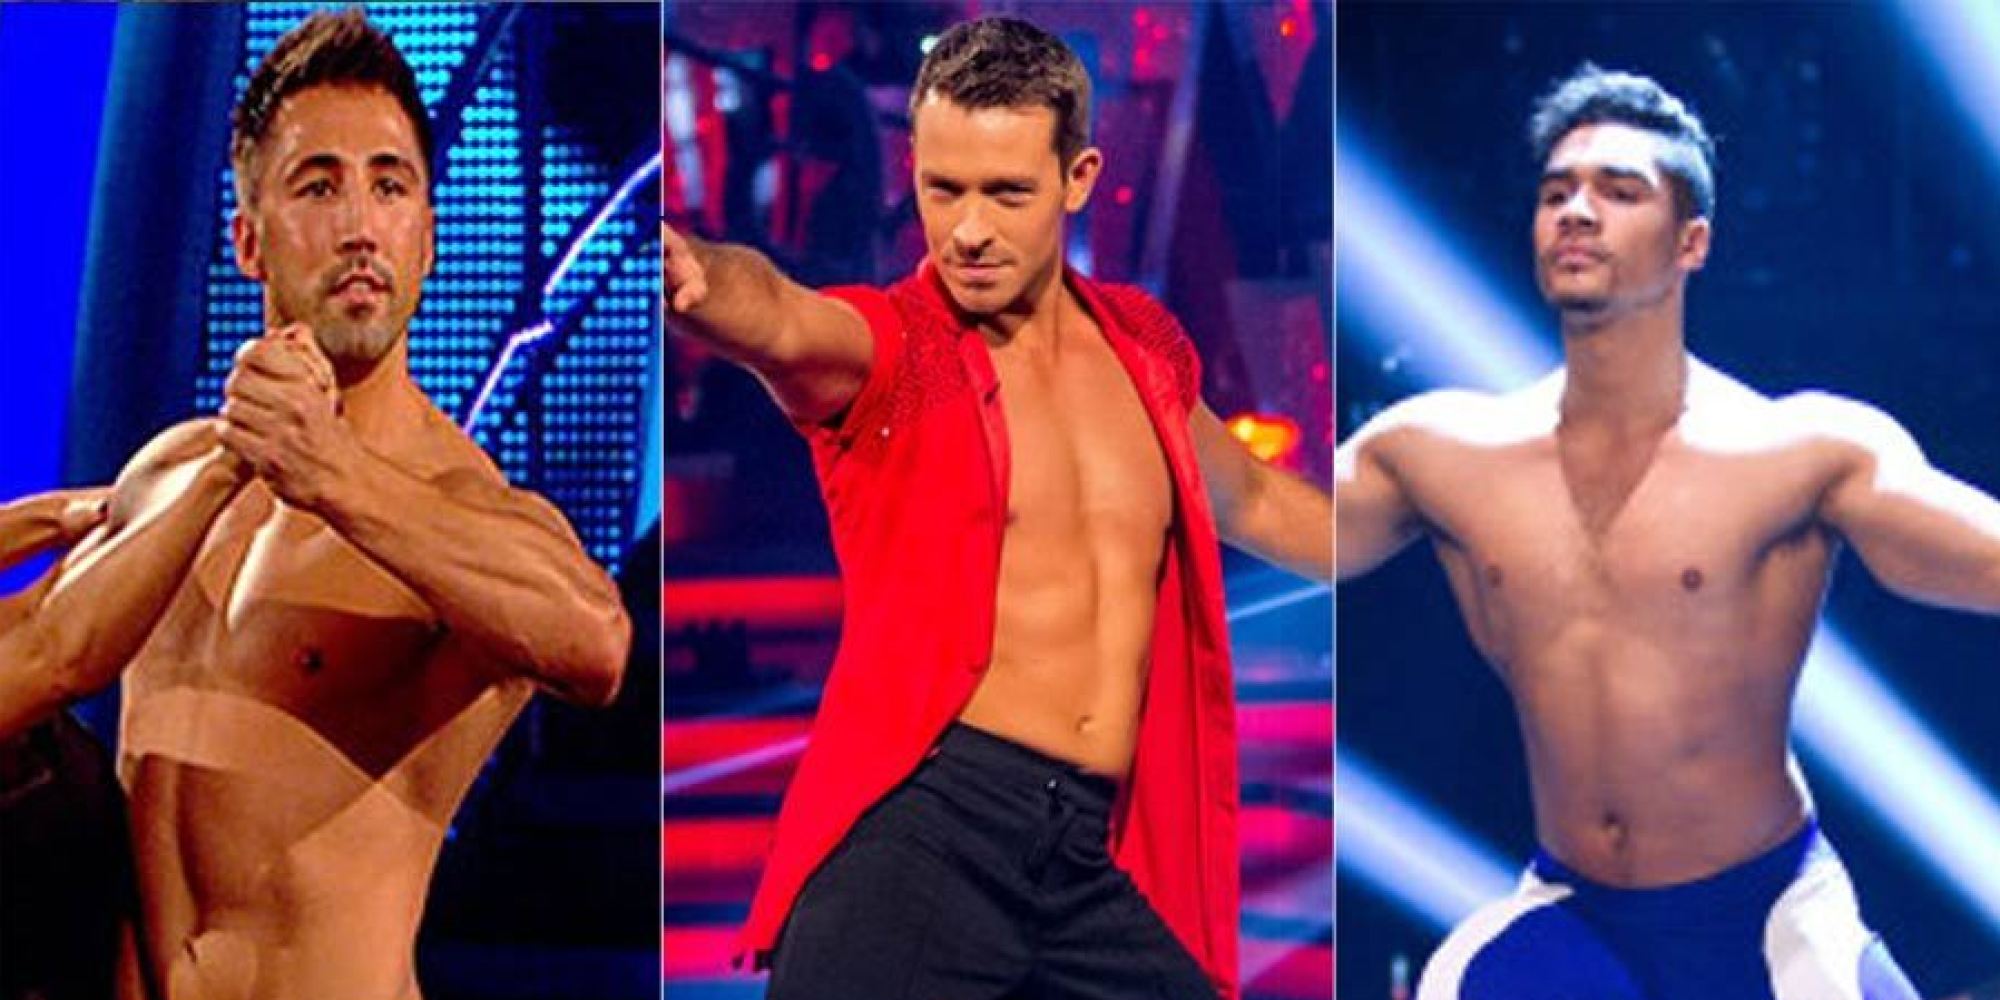 Strictly Come Dancing BBC Denies Banning Naked Male Chests But Do